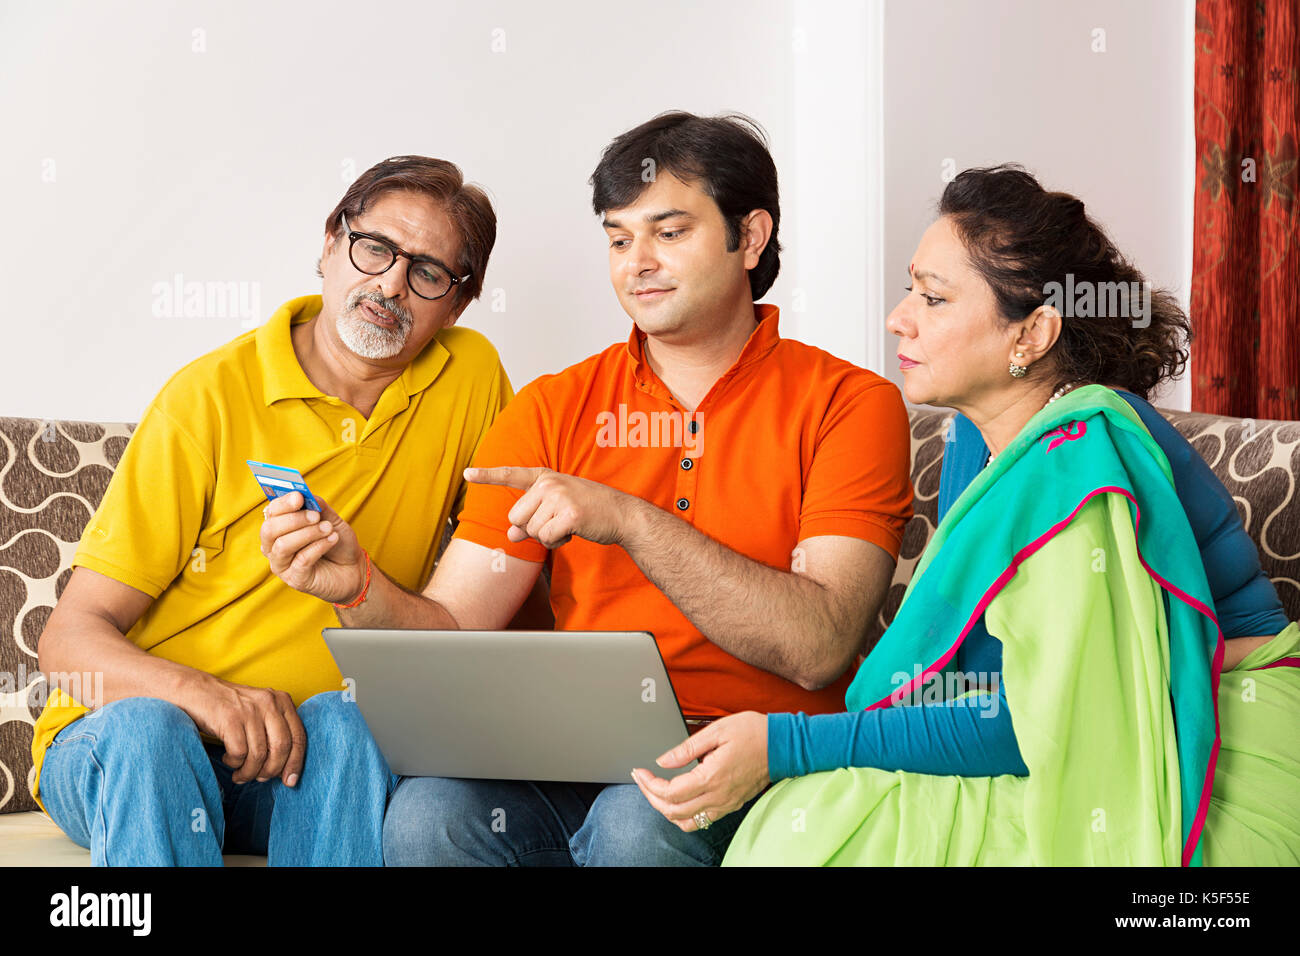 Indian Son And Senior Parents Laptop Credit Card Pointing Online Shopping Stock Photo